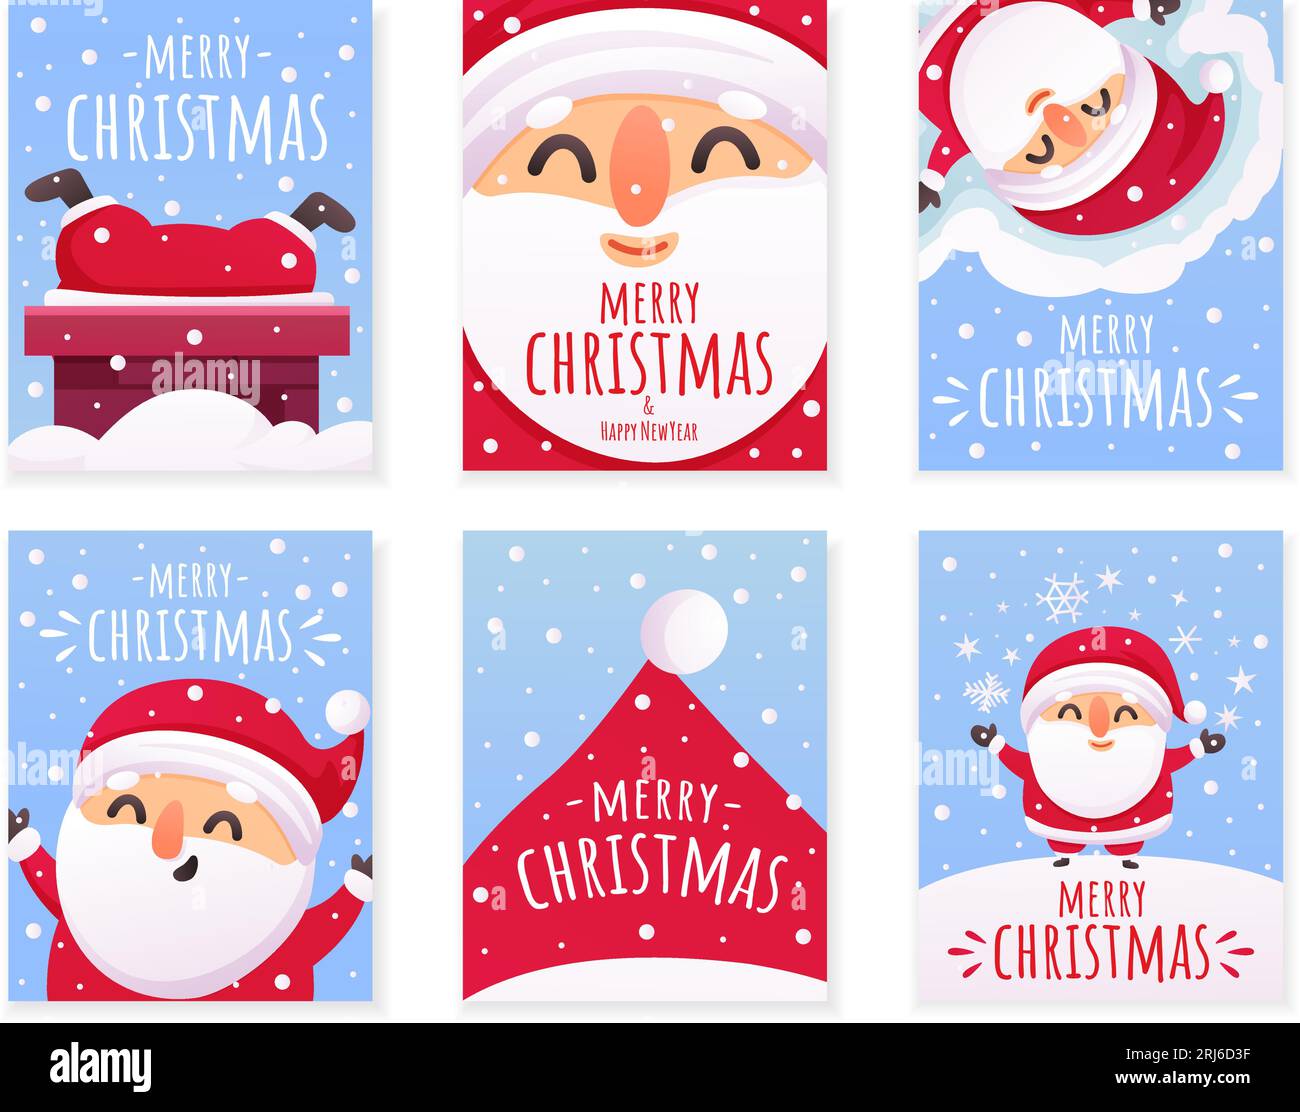 Santa christmas print cards. Happy xmas and new year banners and covers design. Winter holidays funny characters and snowfall nowaday vector posters Stock Vector